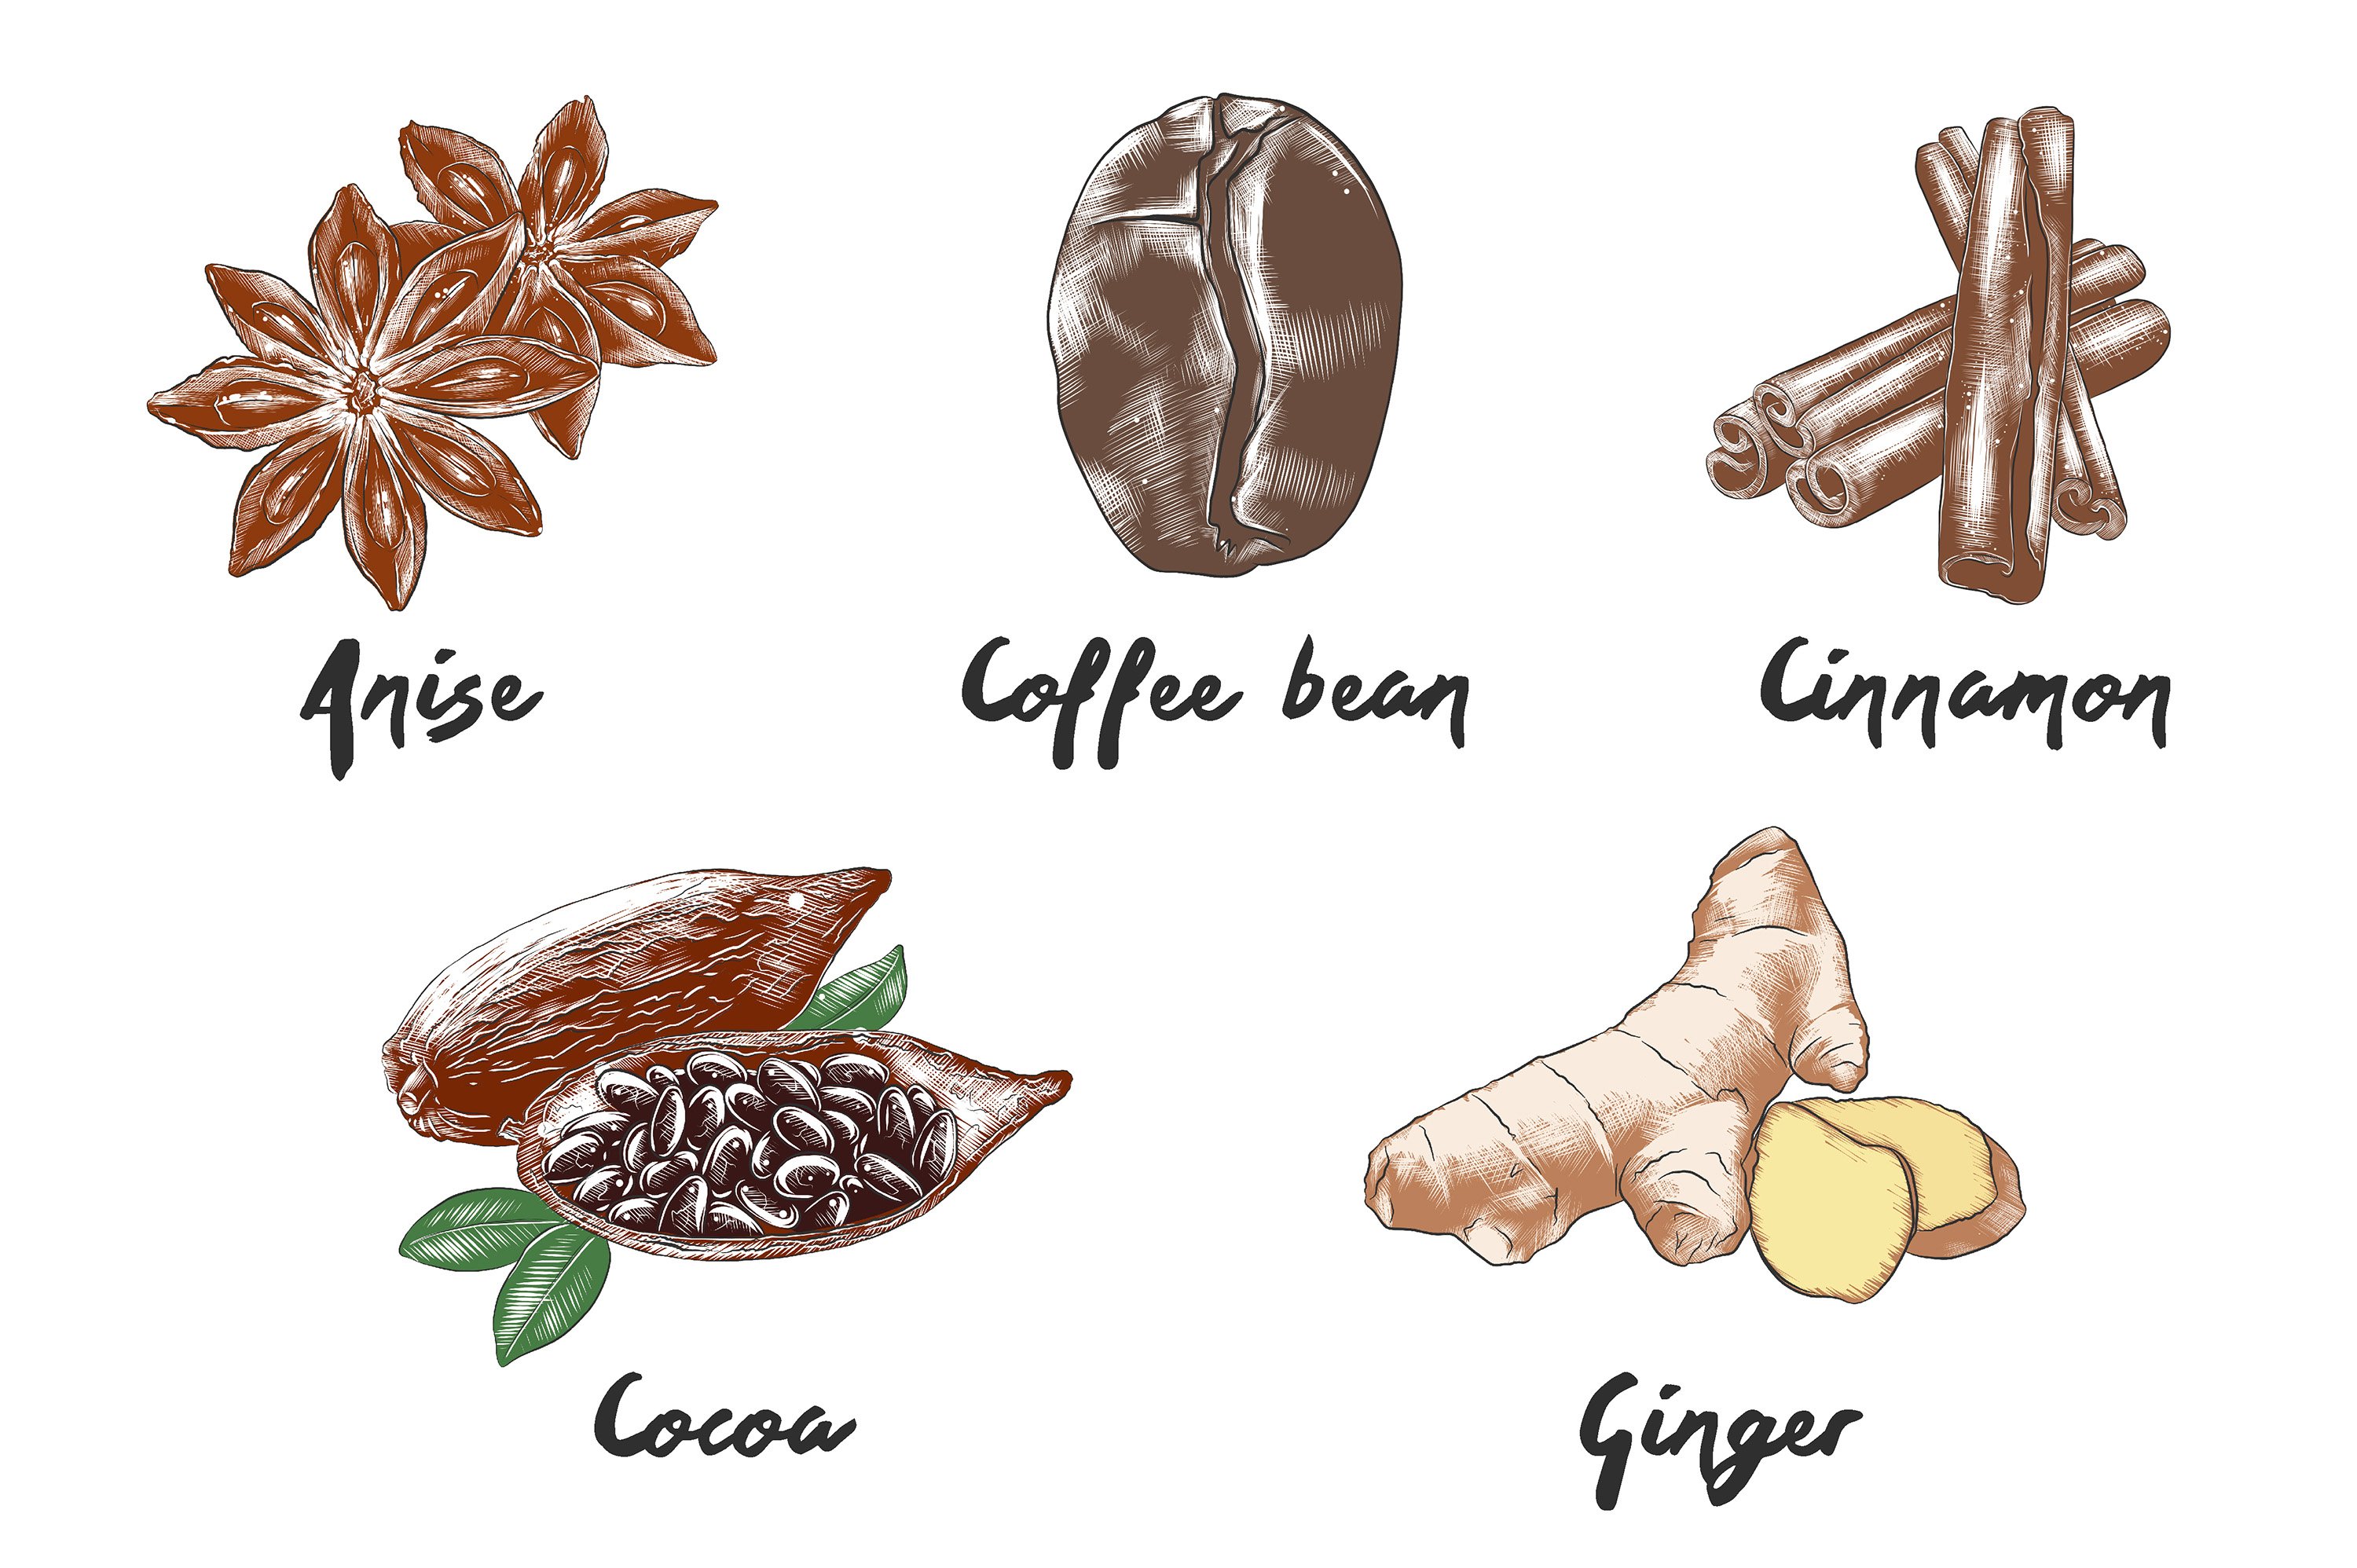 A drawing of different types of coffee beans.